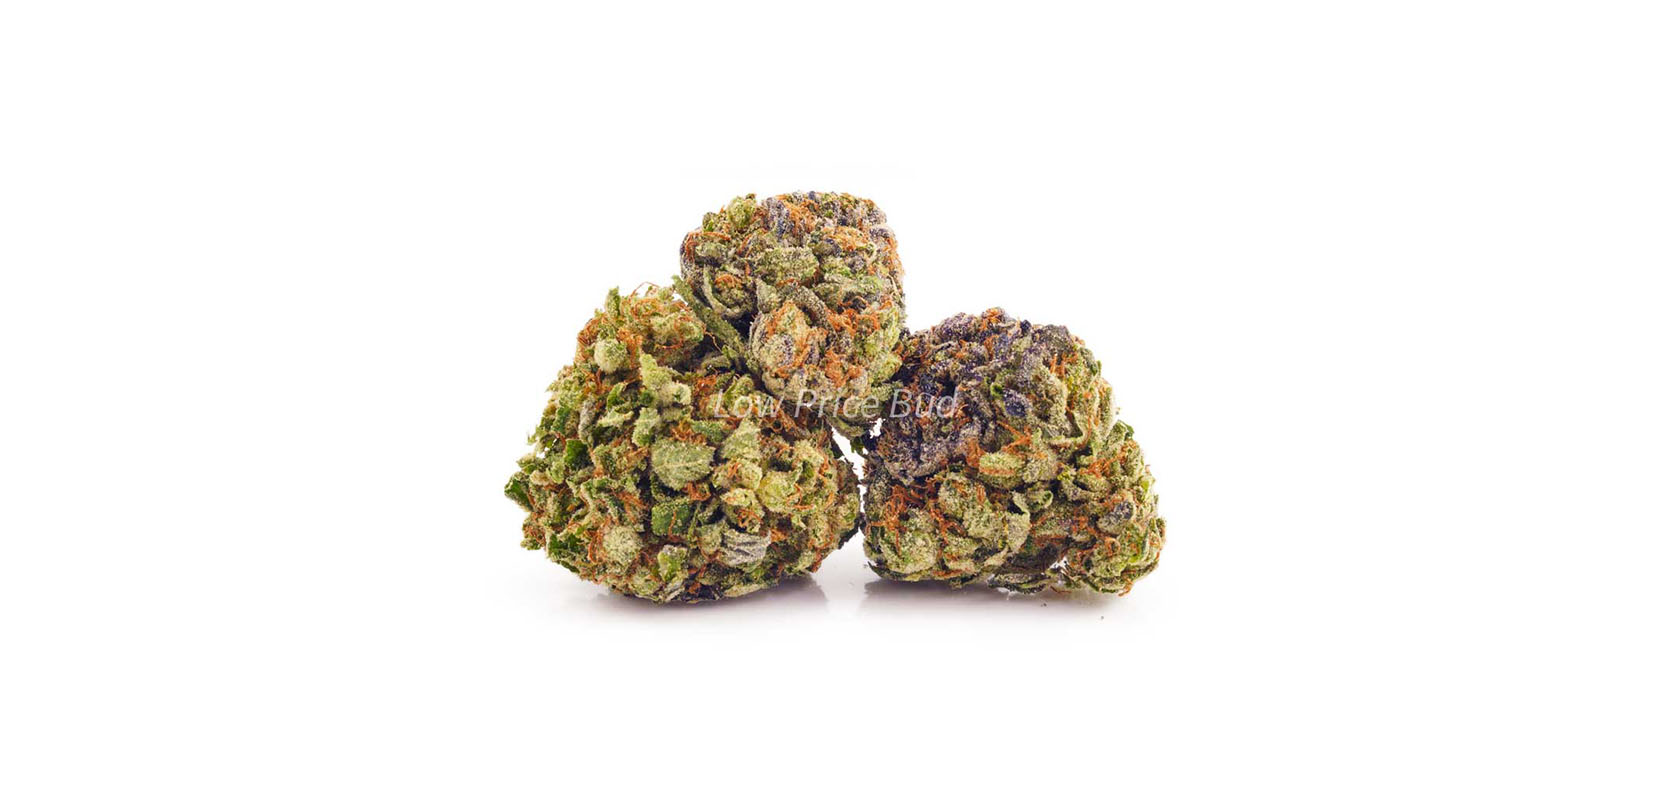 Buy weed Blueberry Rockstar strain from Low Price Bud online dispensary mail order marijuana pot shop.